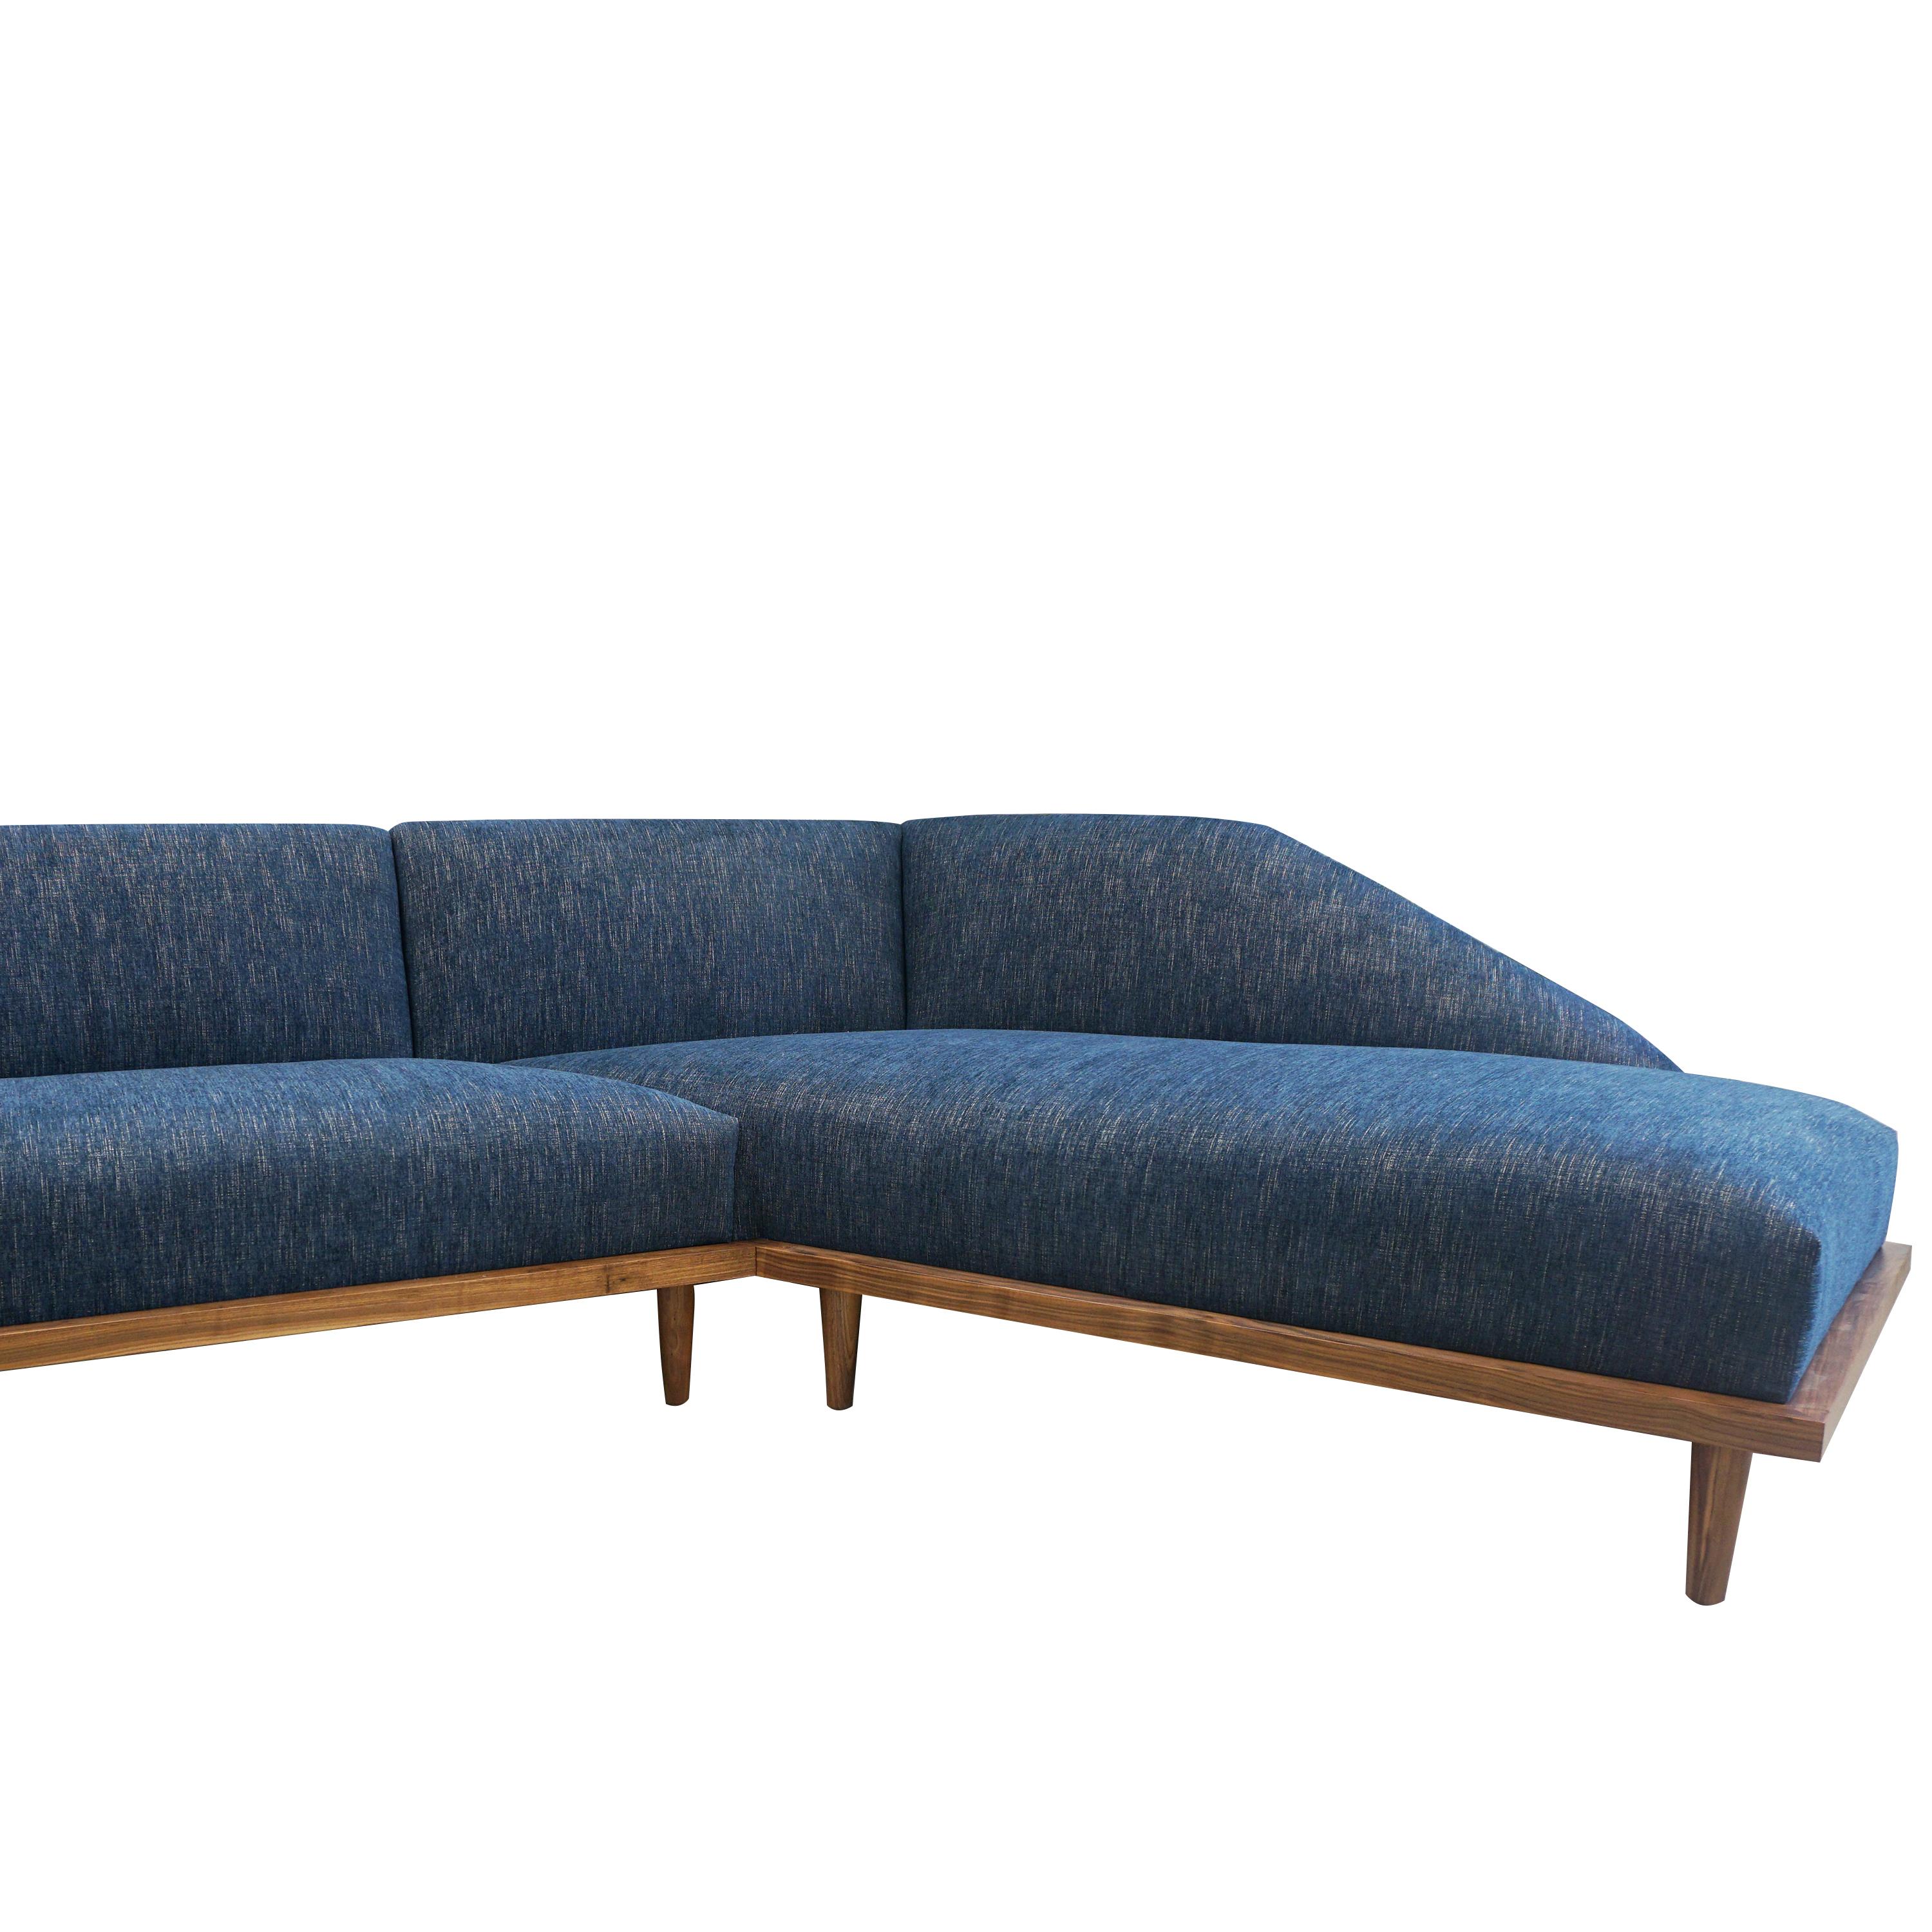 American Large Mid-Century Modern Sectional with Chaise and Walnut Frame For Sale